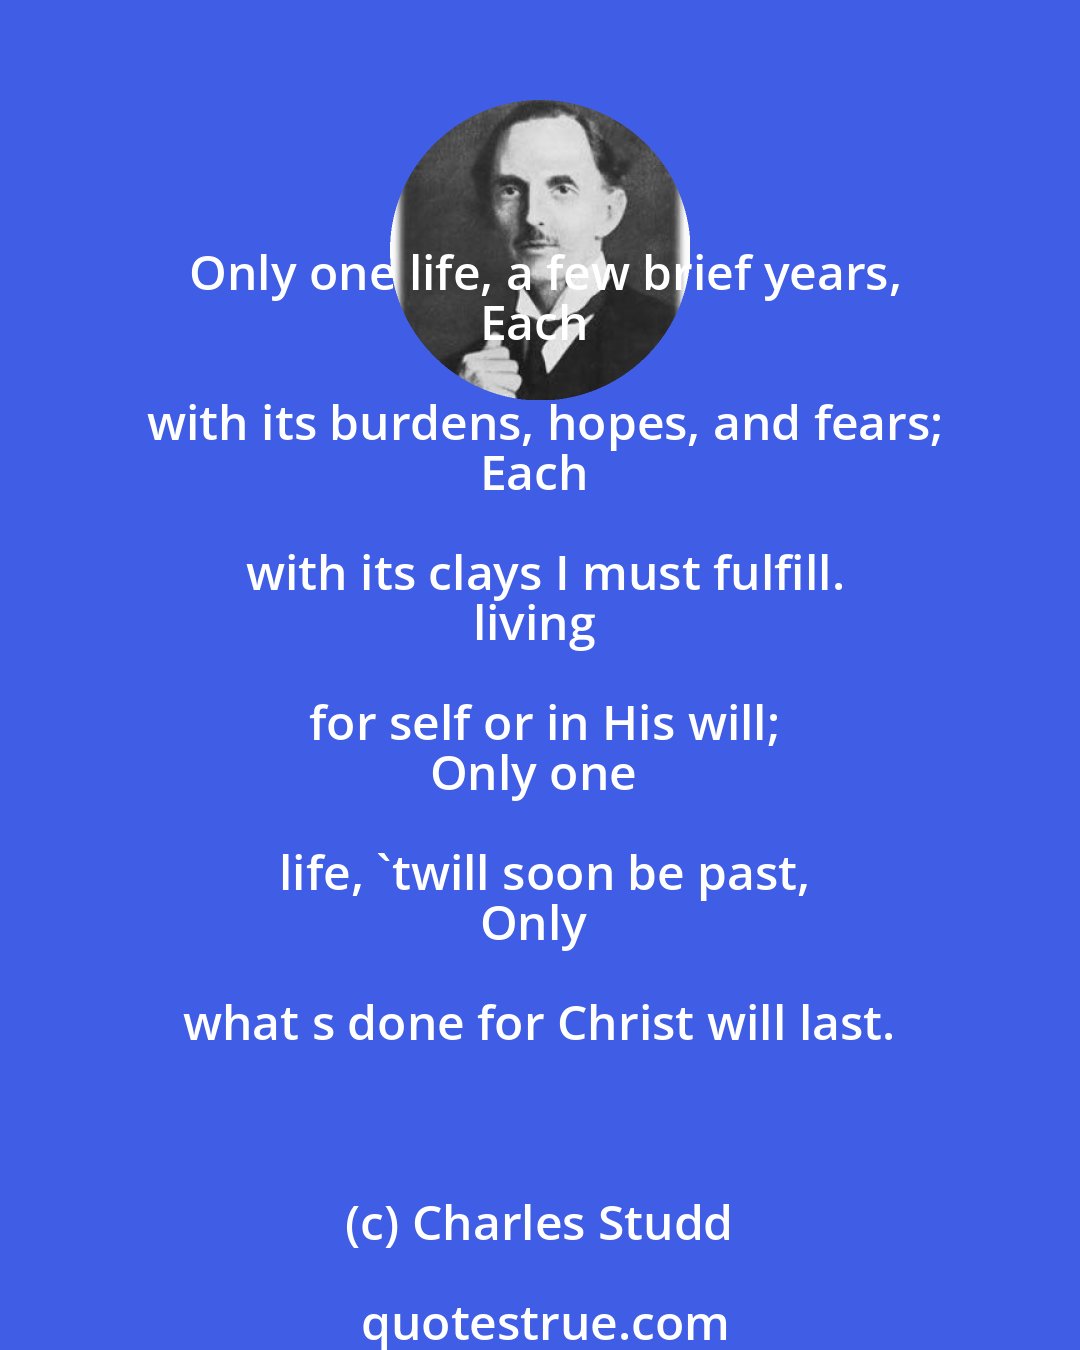 Charles Studd: Only one life, a few brief years,
Each with its burdens, hopes, and fears;
Each with its clays I must fulfill.
living for self or in His will;
Only one life, 'twill soon be past,
Only what s done for Christ will last.